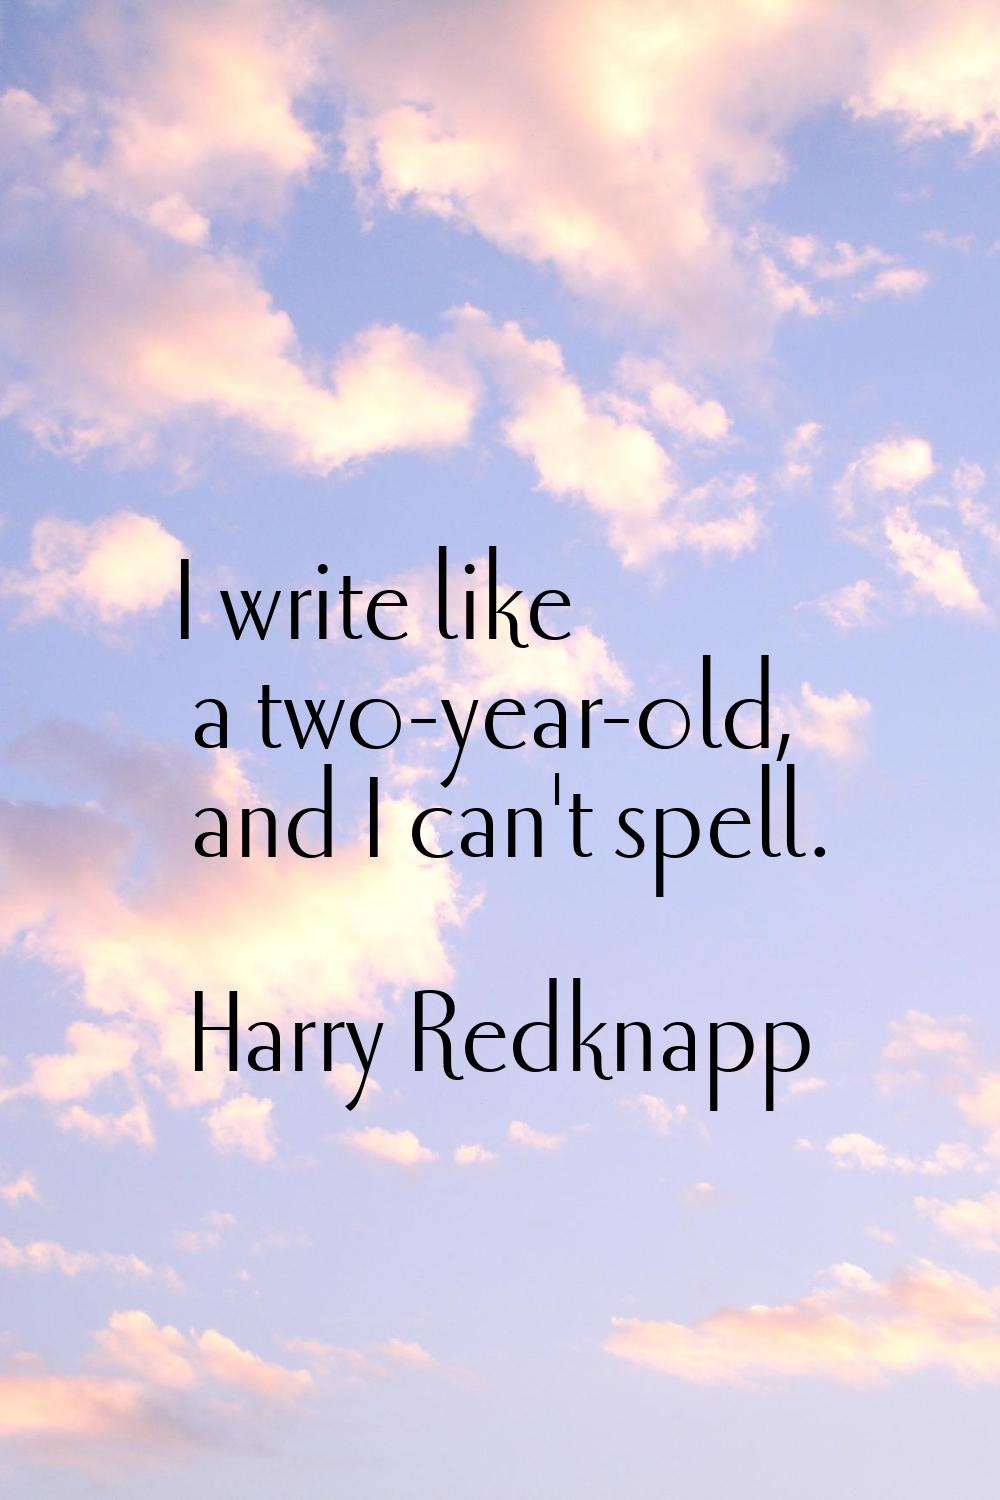 I write like a two-year-old, and I can't spell.